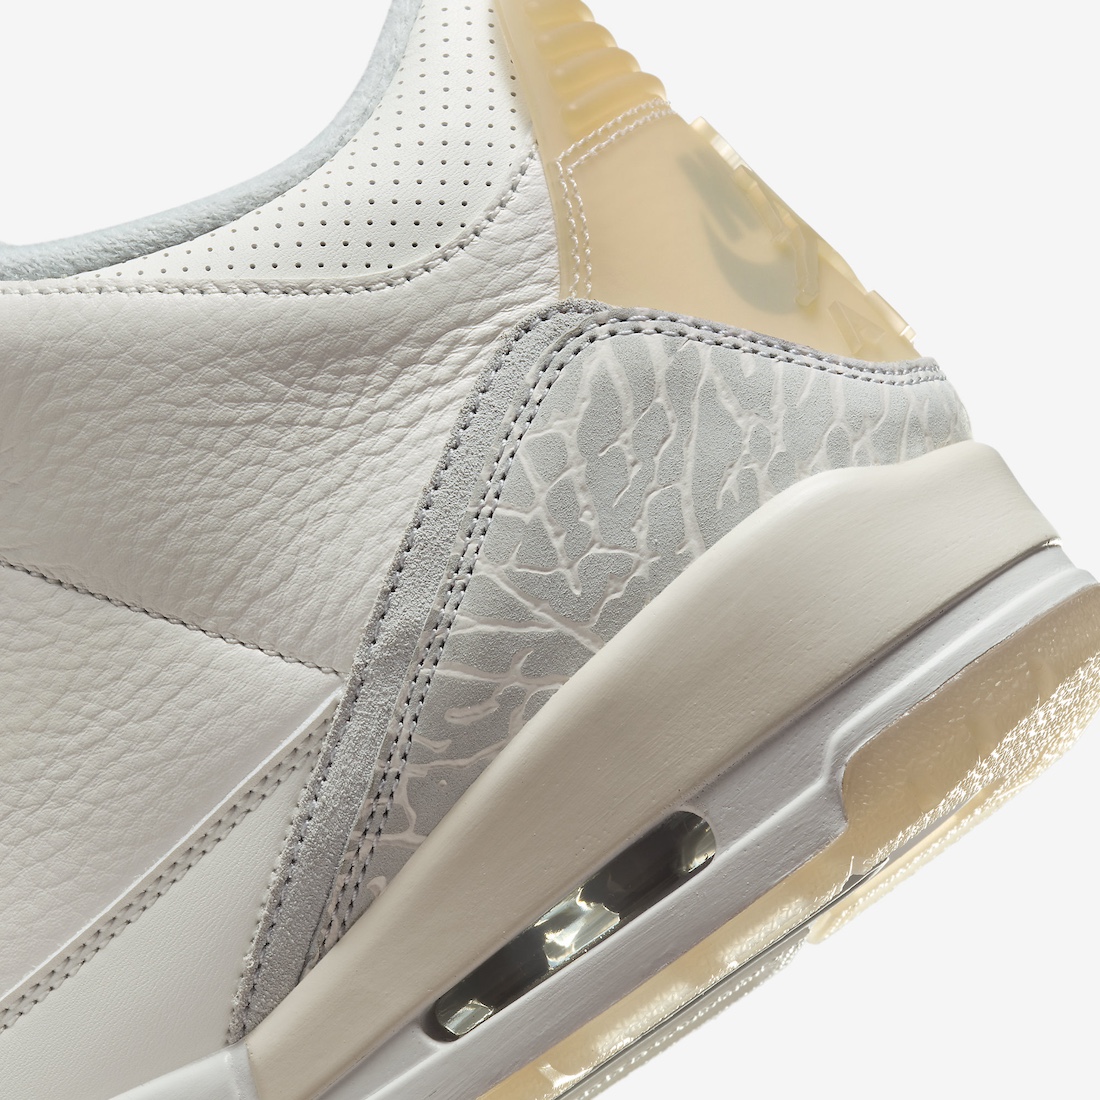 Official Look At The Air Jordan 3 Craft “Ivory”